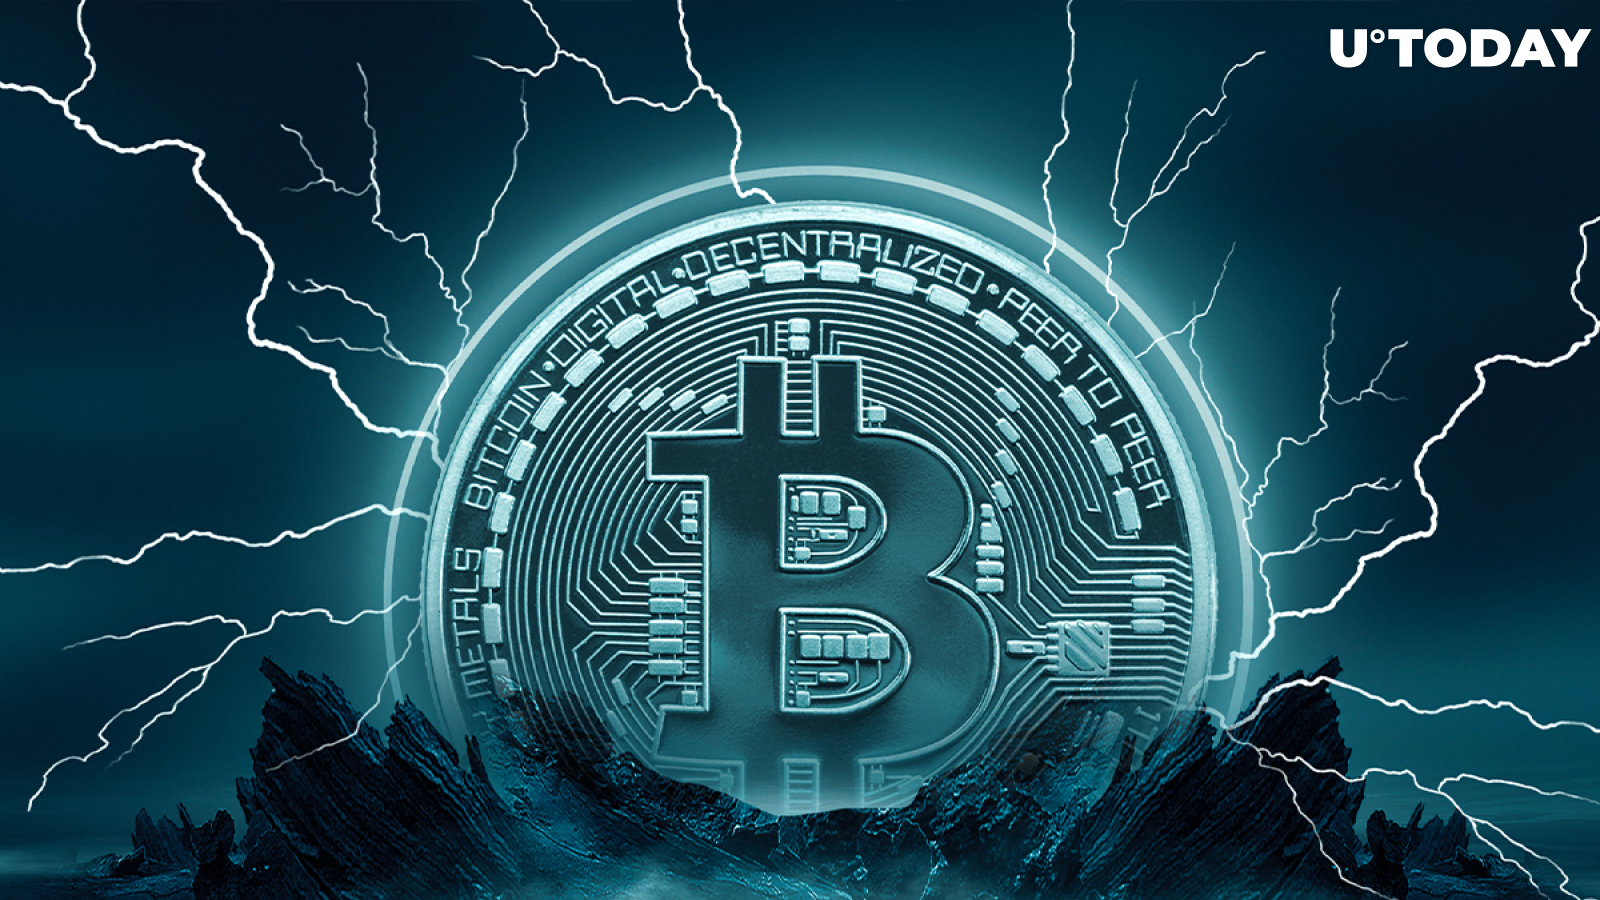 Bitcoin Lightning Network Hits New ATH, 226% Up on Open Payment Channels